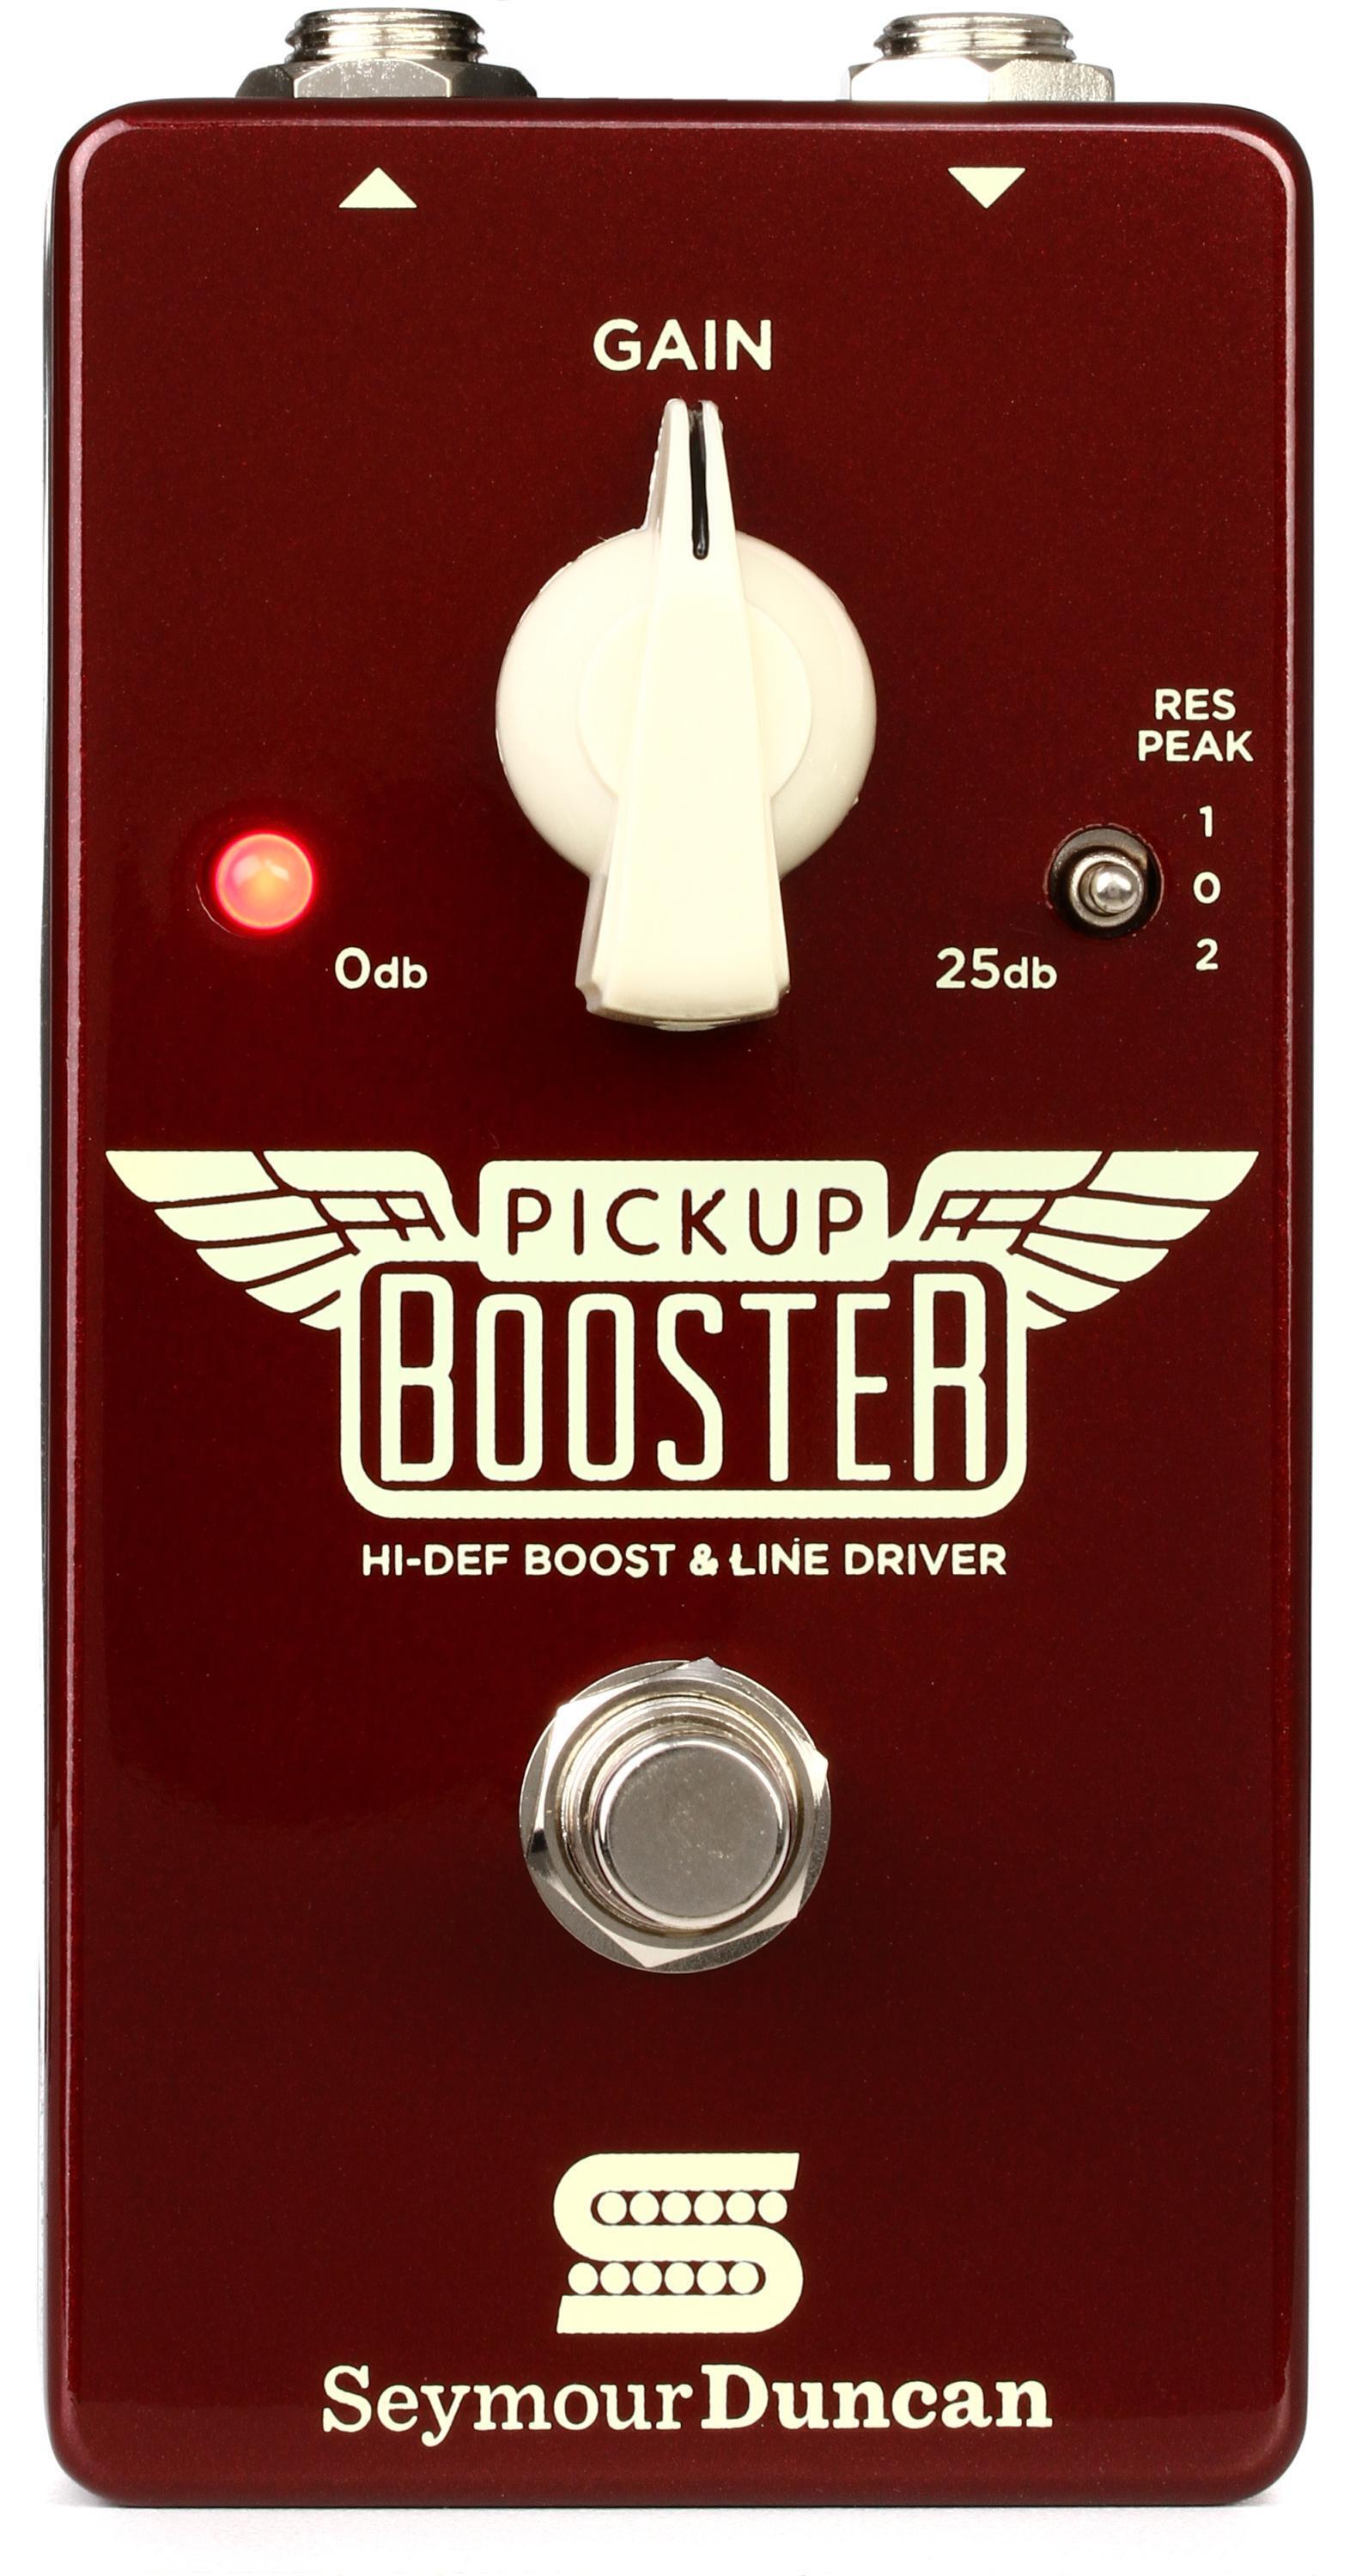 Seymour Duncan Pickup Booster 25dB Boost Pedal | Sweetwater